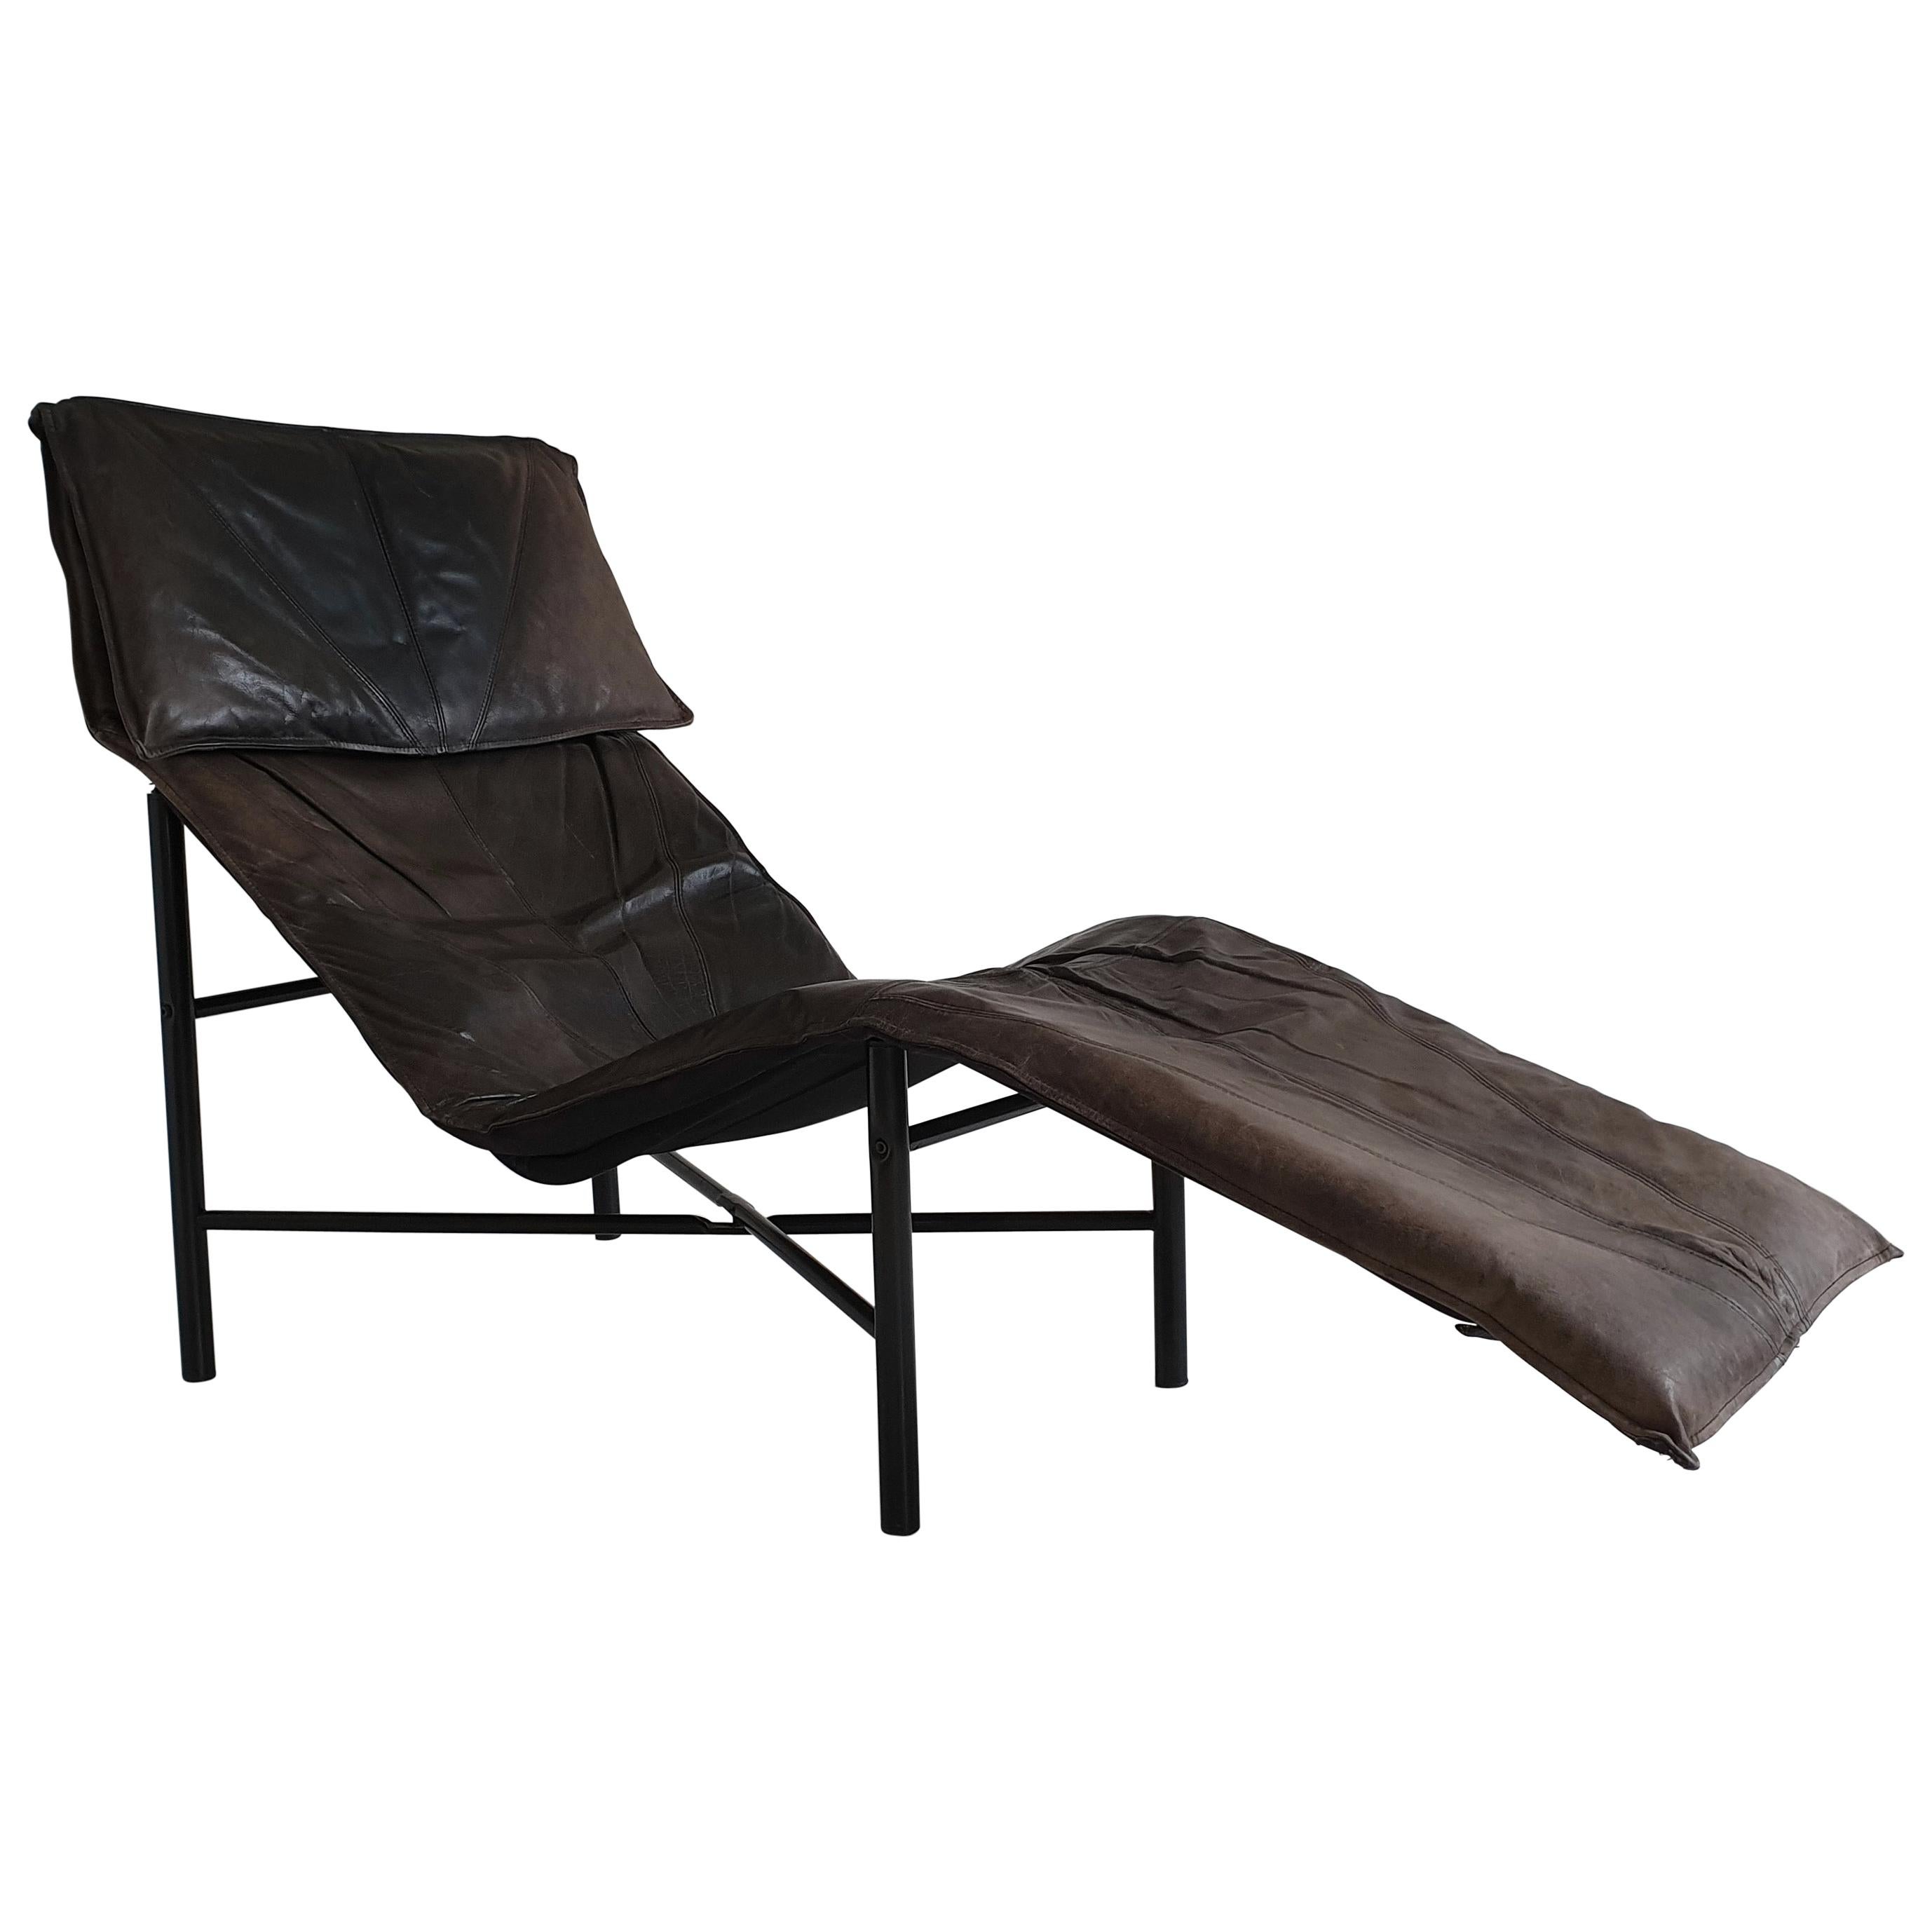 Brown Leather 'Skye' Chaise by Tord Björklund for Ikea, circa 1980